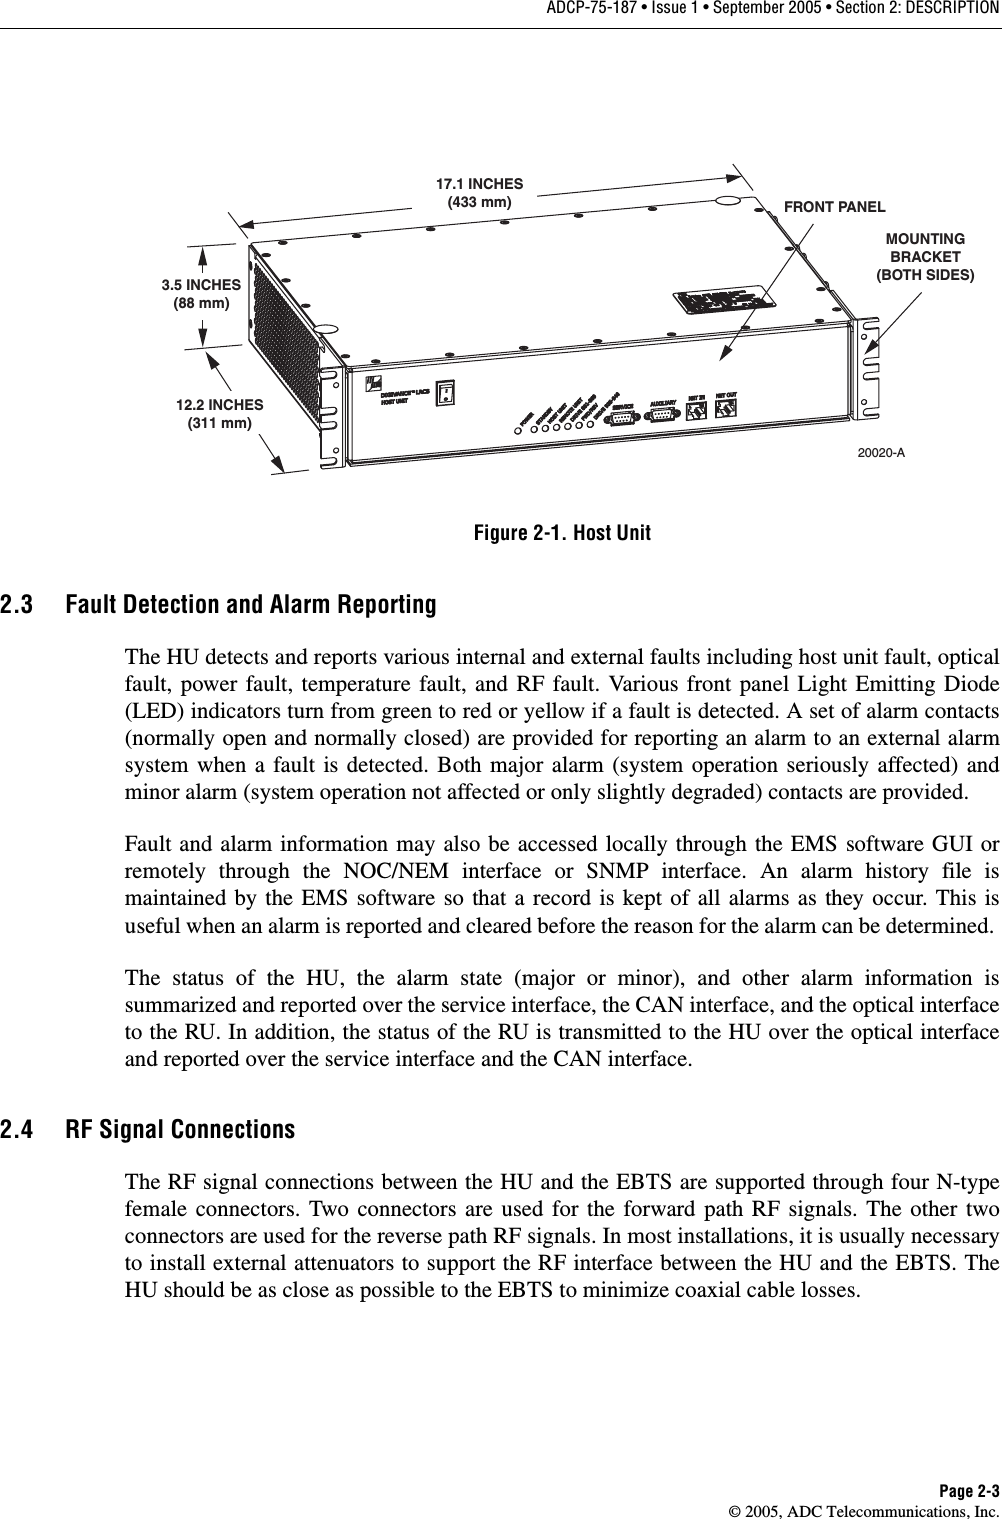 ADCP-75-187 • Issue 1 • September 2005 • Section 2: DESCRIPTIONPage 2-3© 2005, ADC Telecommunications, Inc.Figure 2-1. Host Unit2.3 Fault Detection and Alarm ReportingThe HU detects and reports various internal and external faults including host unit fault, opticalfault, power fault, temperature fault, and RF fault. Various front panel Light Emitting Diode(LED) indicators turn from green to red or yellow if a fault is detected. A set of alarm contacts(normally open and normally closed) are provided for reporting an alarm to an external alarmsystem when a fault is detected. Both major alarm (system operation seriously affected) andminor alarm (system operation not affected or only slightly degraded) contacts are provided. Fault and alarm information may also be accessed locally through the EMS software GUI orremotely through the NOC/NEM interface or SNMP interface. An alarm history file ismaintained by the EMS software so that a record is kept of all alarms as they occur. This isuseful when an alarm is reported and cleared before the reason for the alarm can be determined. The status of the HU, the alarm state (major or minor), and other alarm information issummarized and reported over the service interface, the CAN interface, and the optical interfaceto the RU. In addition, the status of the RU is transmitted to the HU over the optical interfaceand reported over the service interface and the CAN interface. 2.4 RF Signal ConnectionsThe RF signal connections between the HU and the EBTS are supported through four N-typefemale connectors. Two connectors are used for the forward path RF signals. The other twoconnectors are used for the reverse path RF signals. In most installations, it is usually necessaryto install external attenuators to support the RF interface between the HU and the EBTS. TheHU should be as close as possible to the EBTS to minimize coaxial cable losses. 17.1 INCHES(433 mm)3.5 INCHES(88 mm)12.2 INCHES(311 mm)FRONT PANELMOUNTINGBRACKET(BOTH SIDES)20020-A